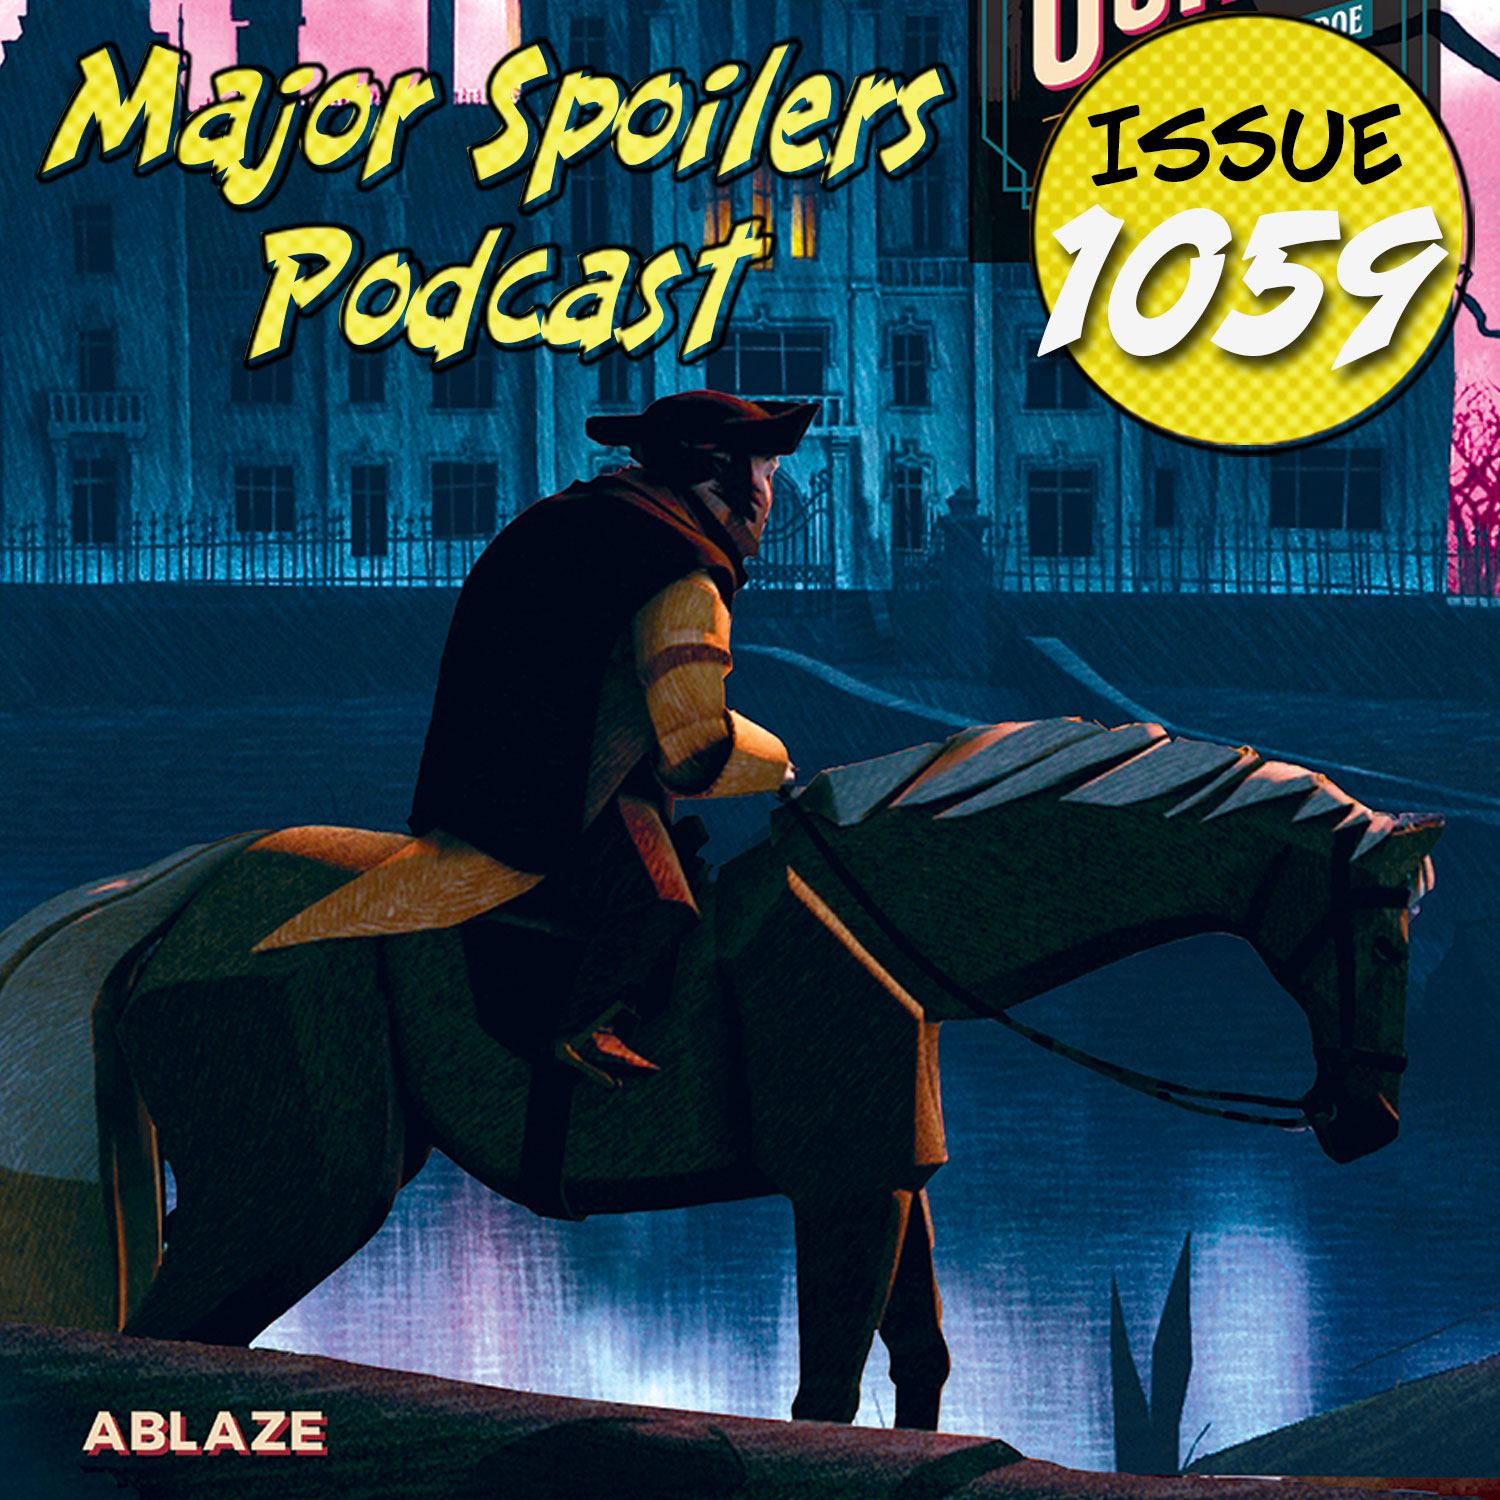 Major Spoilers Podcast #1059: The Fall of the House of Podcasts